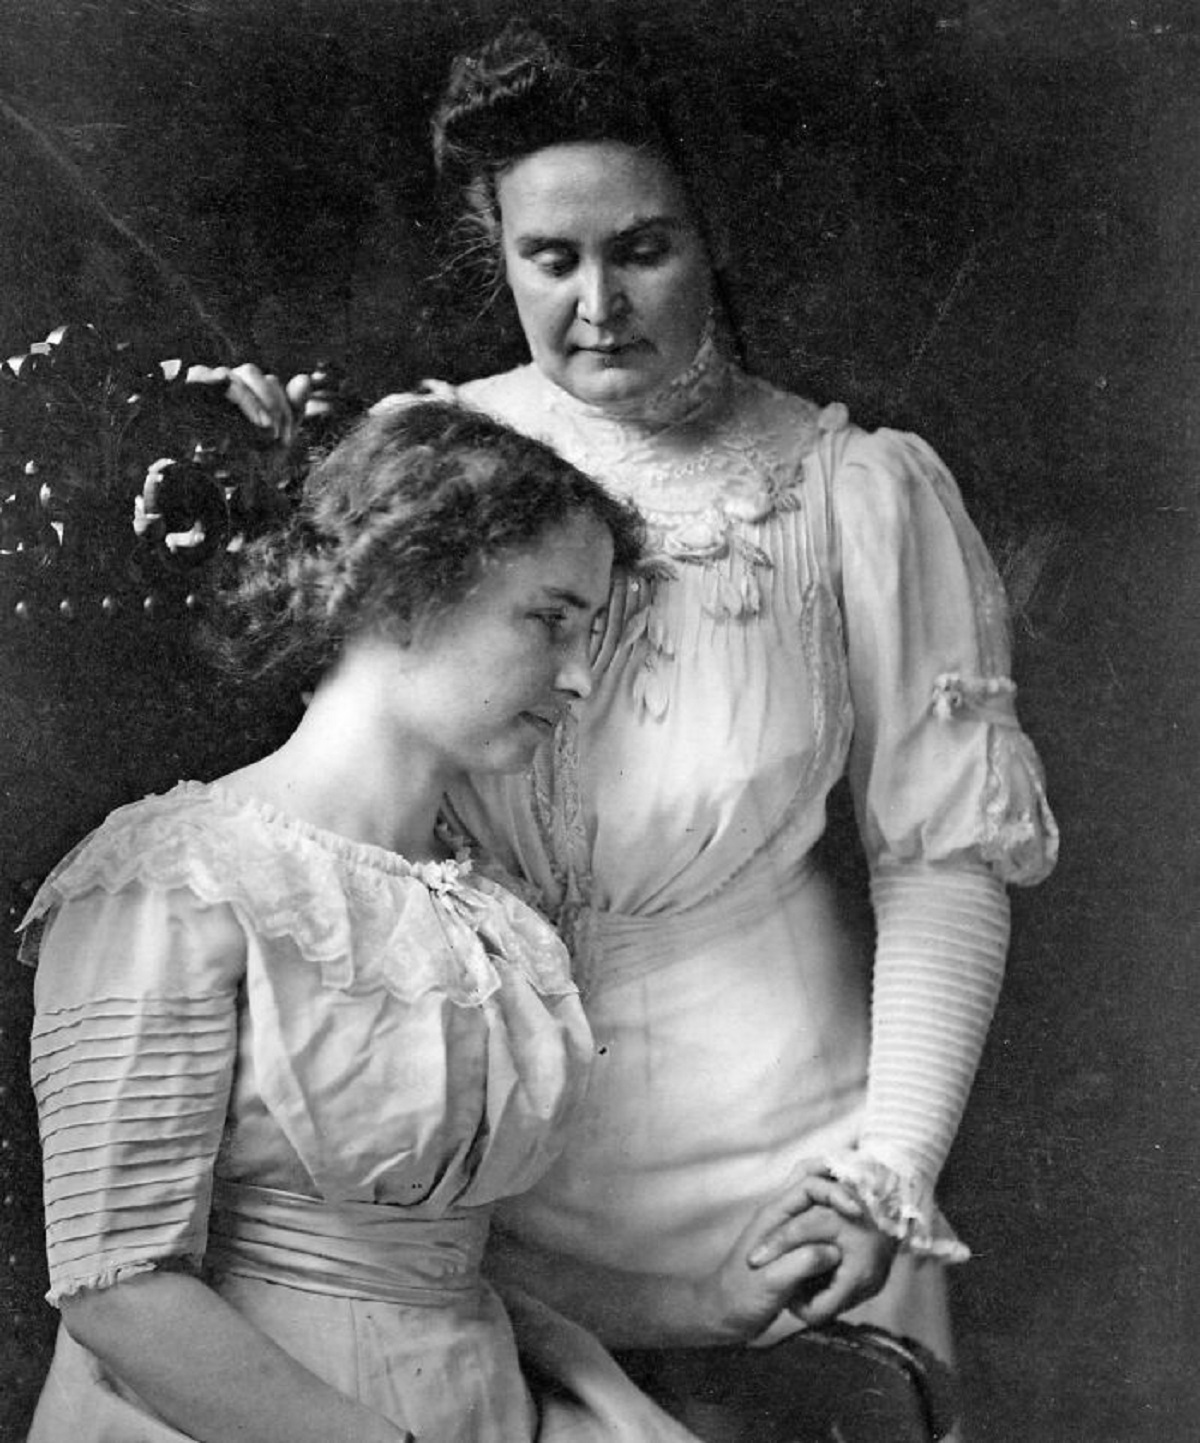 Anne Sullivan, AKA Teacher. Despite helping Helen Keller rise above her disabilities, it's well-documented that she often beat Helen (as a means of disciplining her when she was still a "wild" feral child), and colluded with the Kellers in preventing Helen from marrying the man she loved.